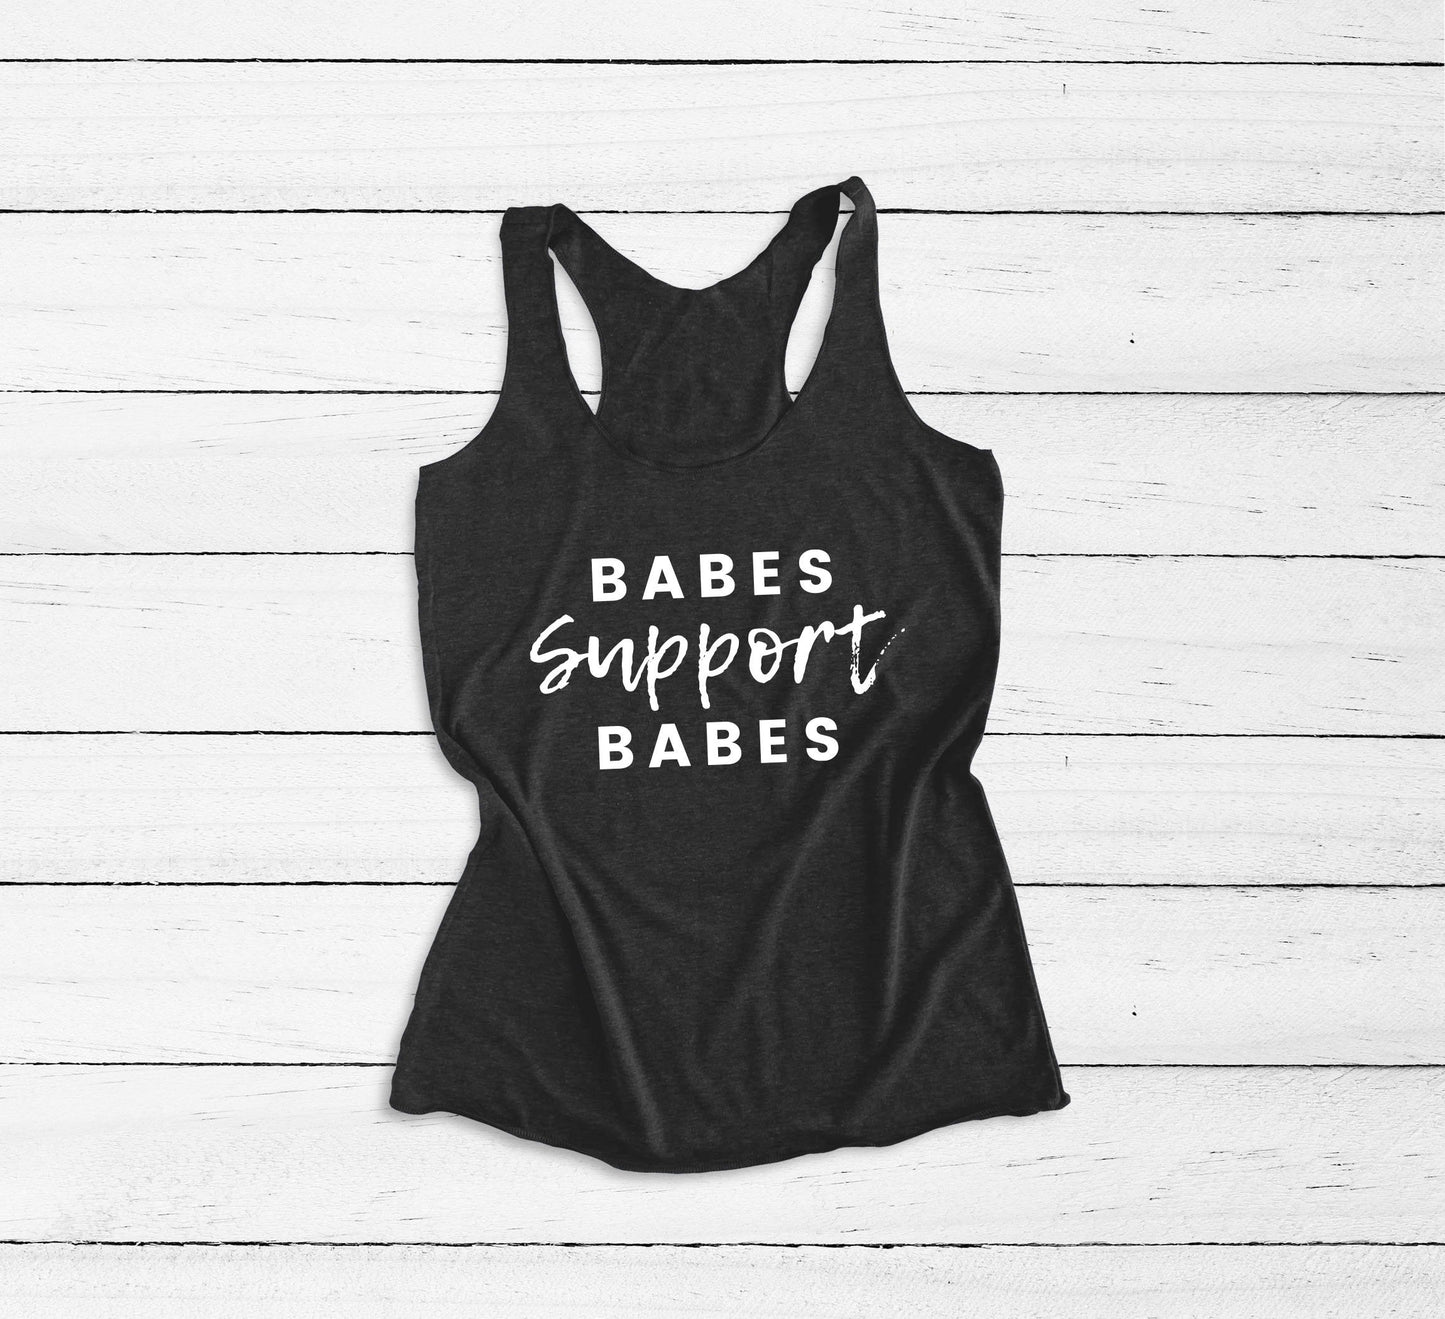 Babes Support Babes triblend tank top, babes, girl power, Motivational shirts, Power to the girls